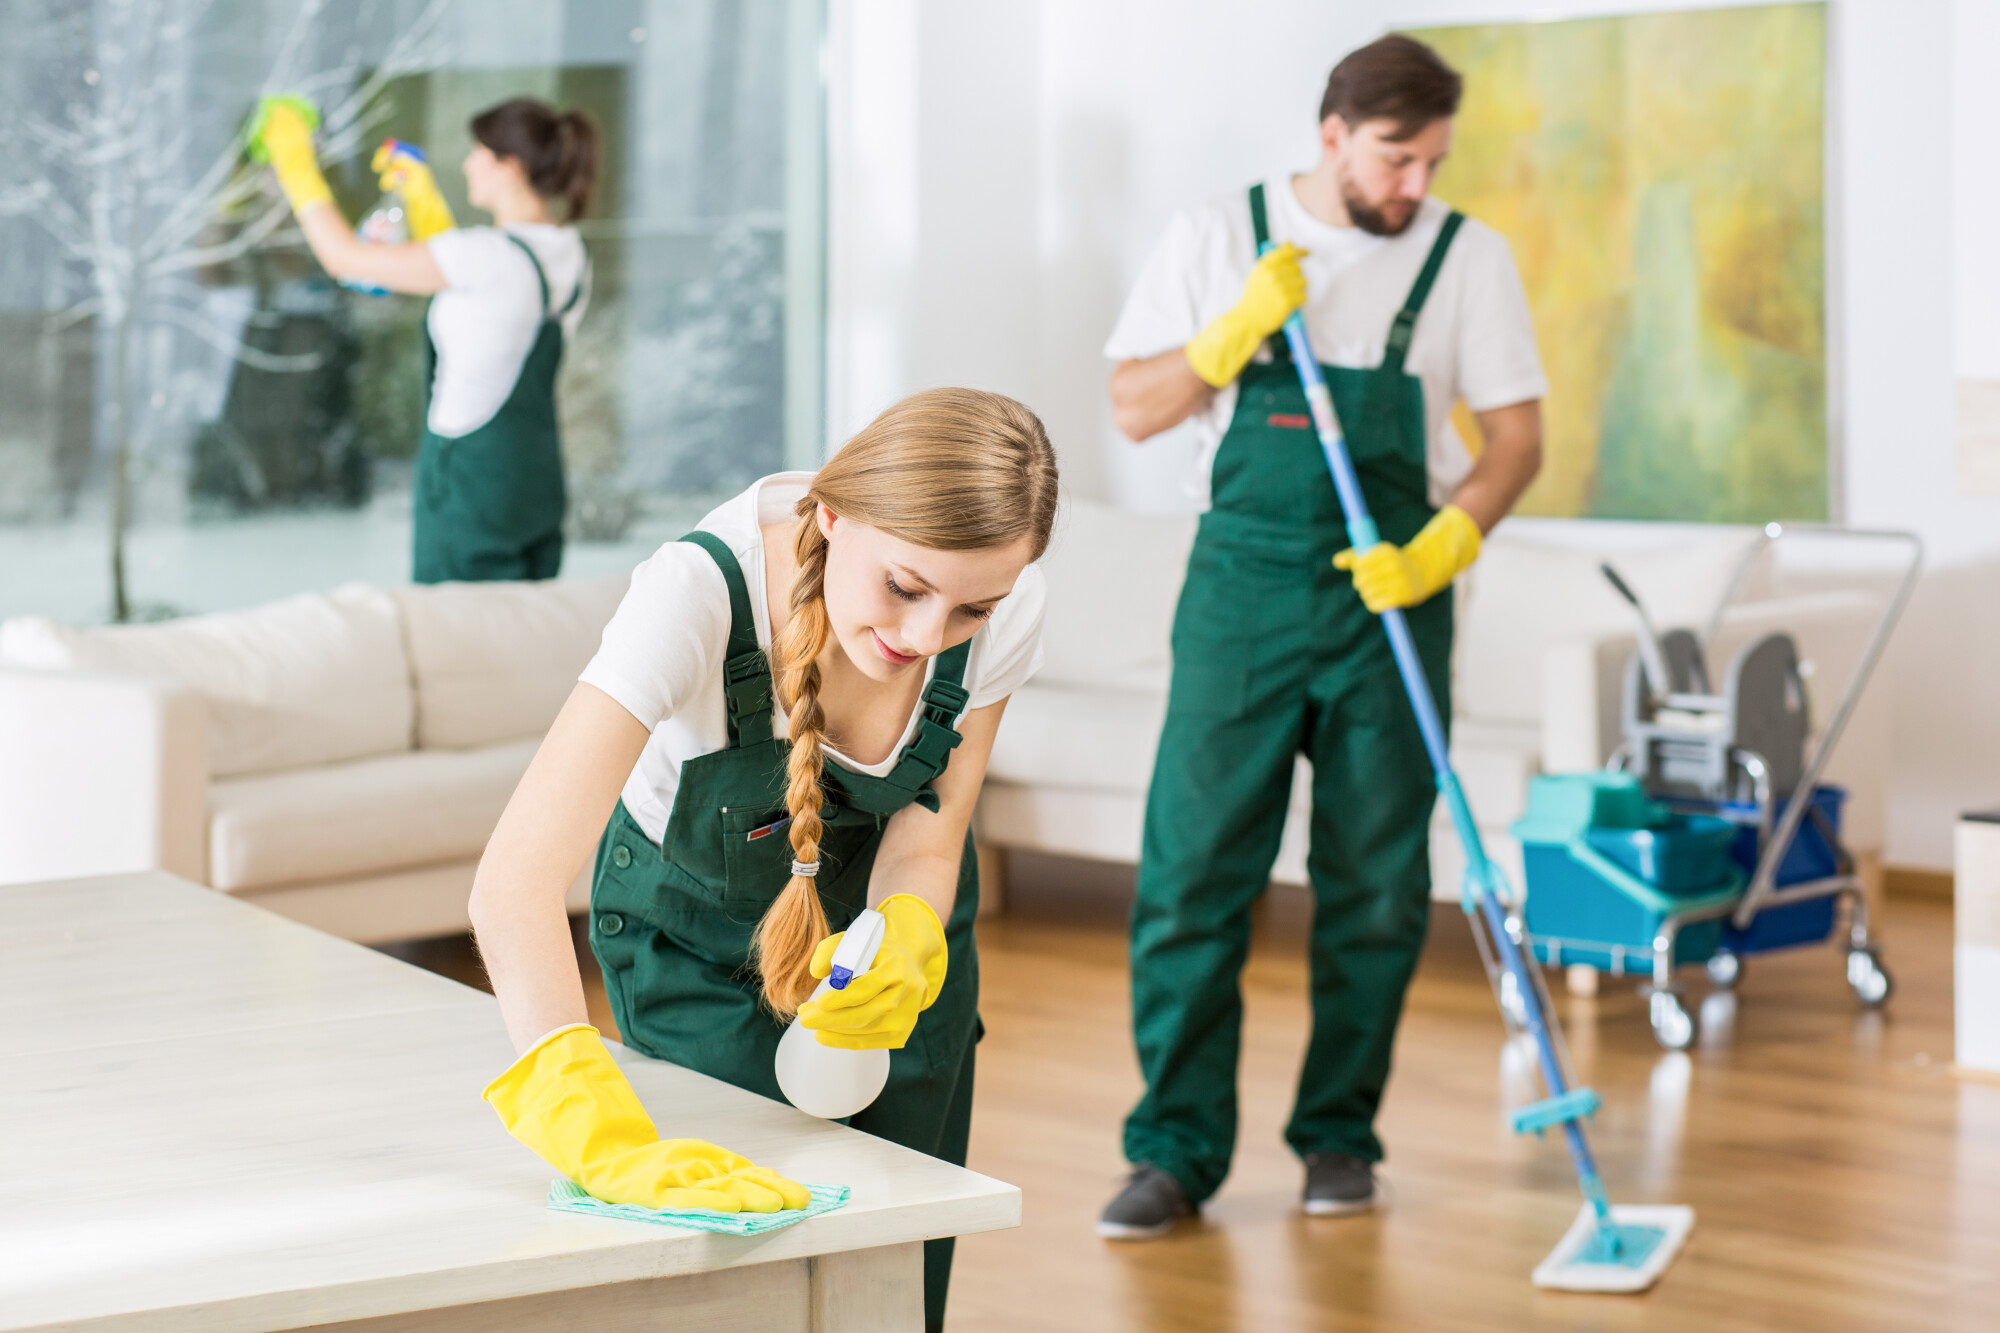 Should you take care of moving in or moving out cleaning yourself? Learn about the pros and cons of move-in/out cleaning services here.